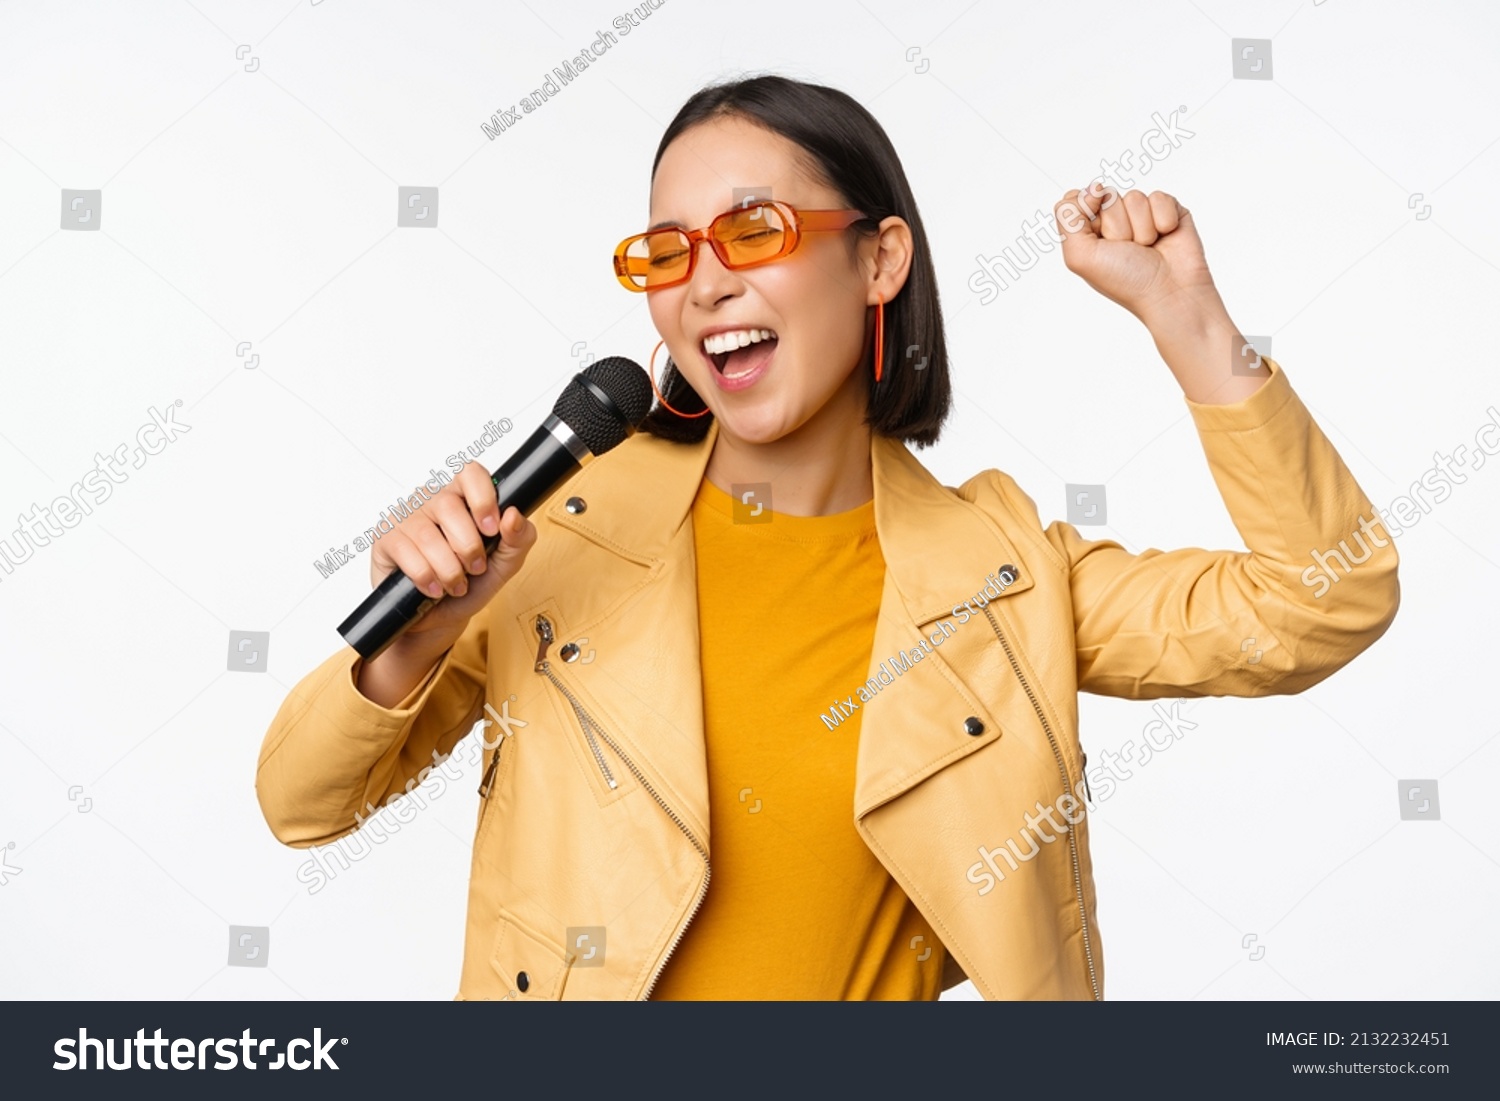 Stylish asian girl in sunglasses, singing songs with microphone, holding mic and dancing at karaoke, posing against white background #2132232451